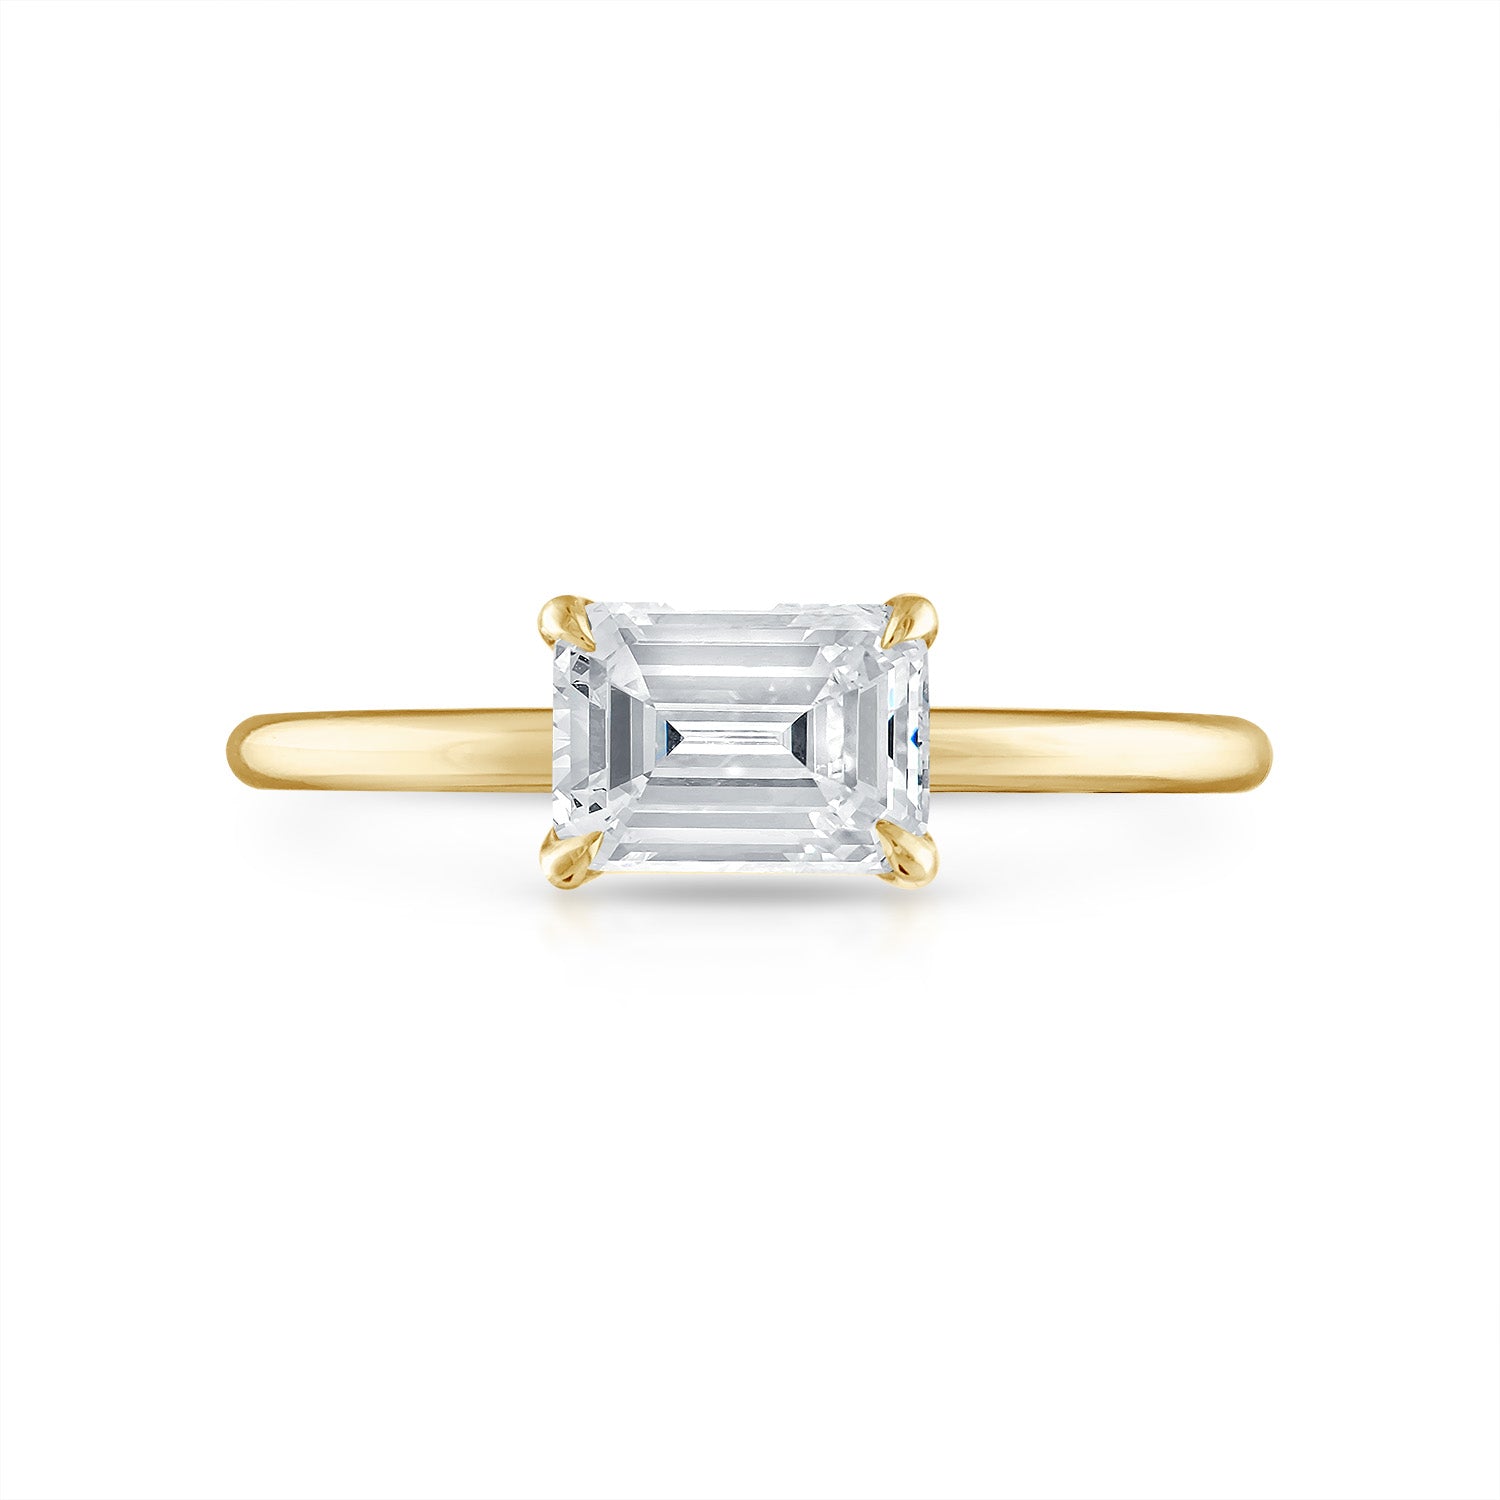 Sideways Emerald Solitaire Engagement Ring in Yellow Gold